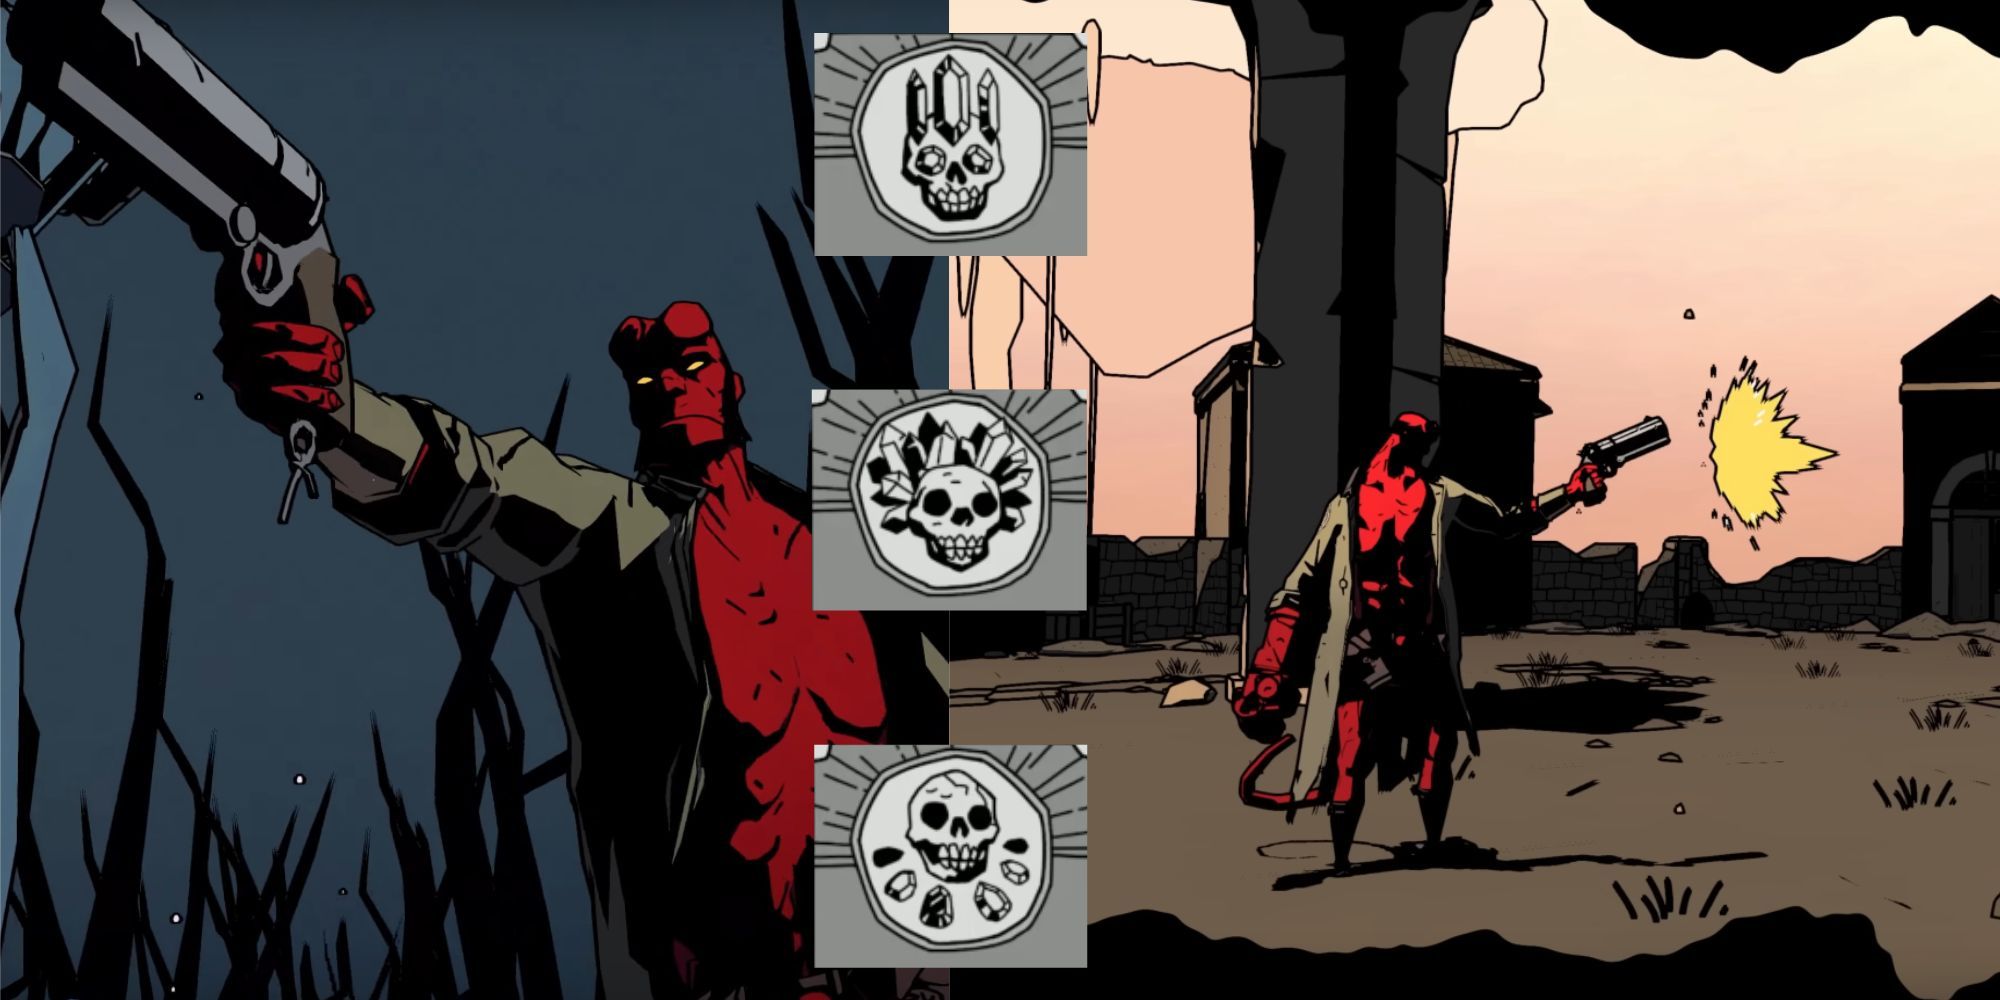 Collage Of Hellboy From Game Aiming Weapons With Wyrd Modifier Icons Down Center